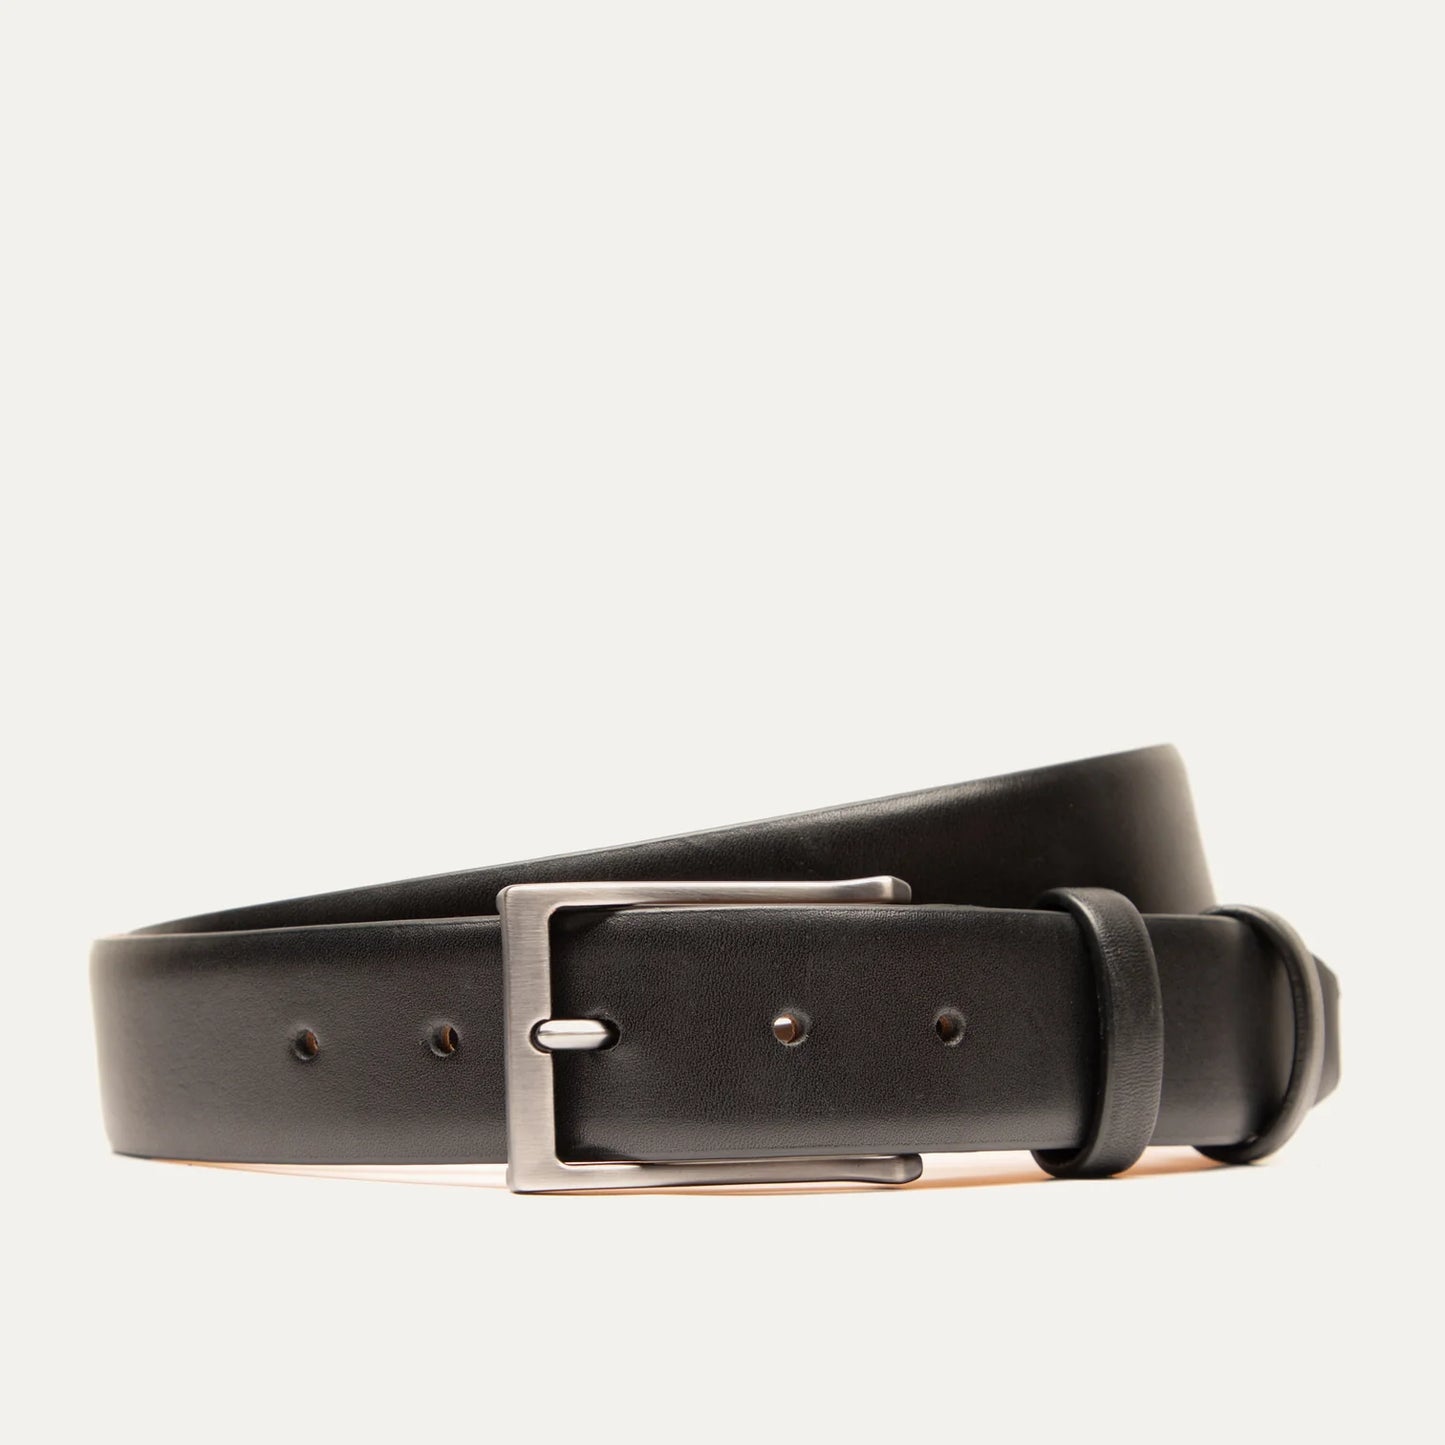 Load image into Gallery viewer, Will Leather Goods Glazed Calf Skin Belt - Black
